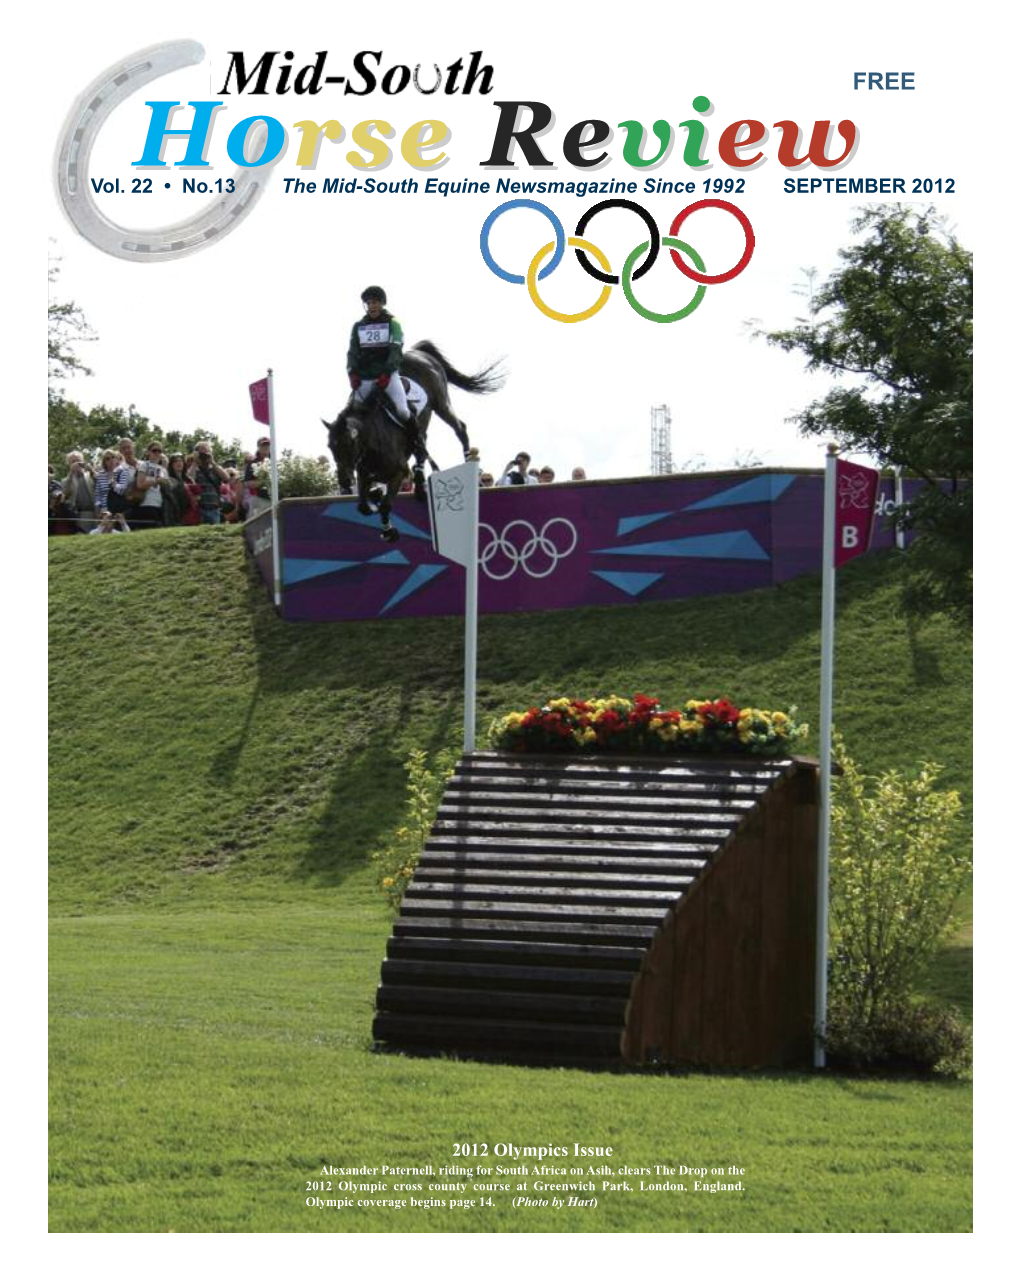 Vol. 22 • No.13 the Mid-South Equine Newsmagazine Since 1992 SEPTEMBER 2012